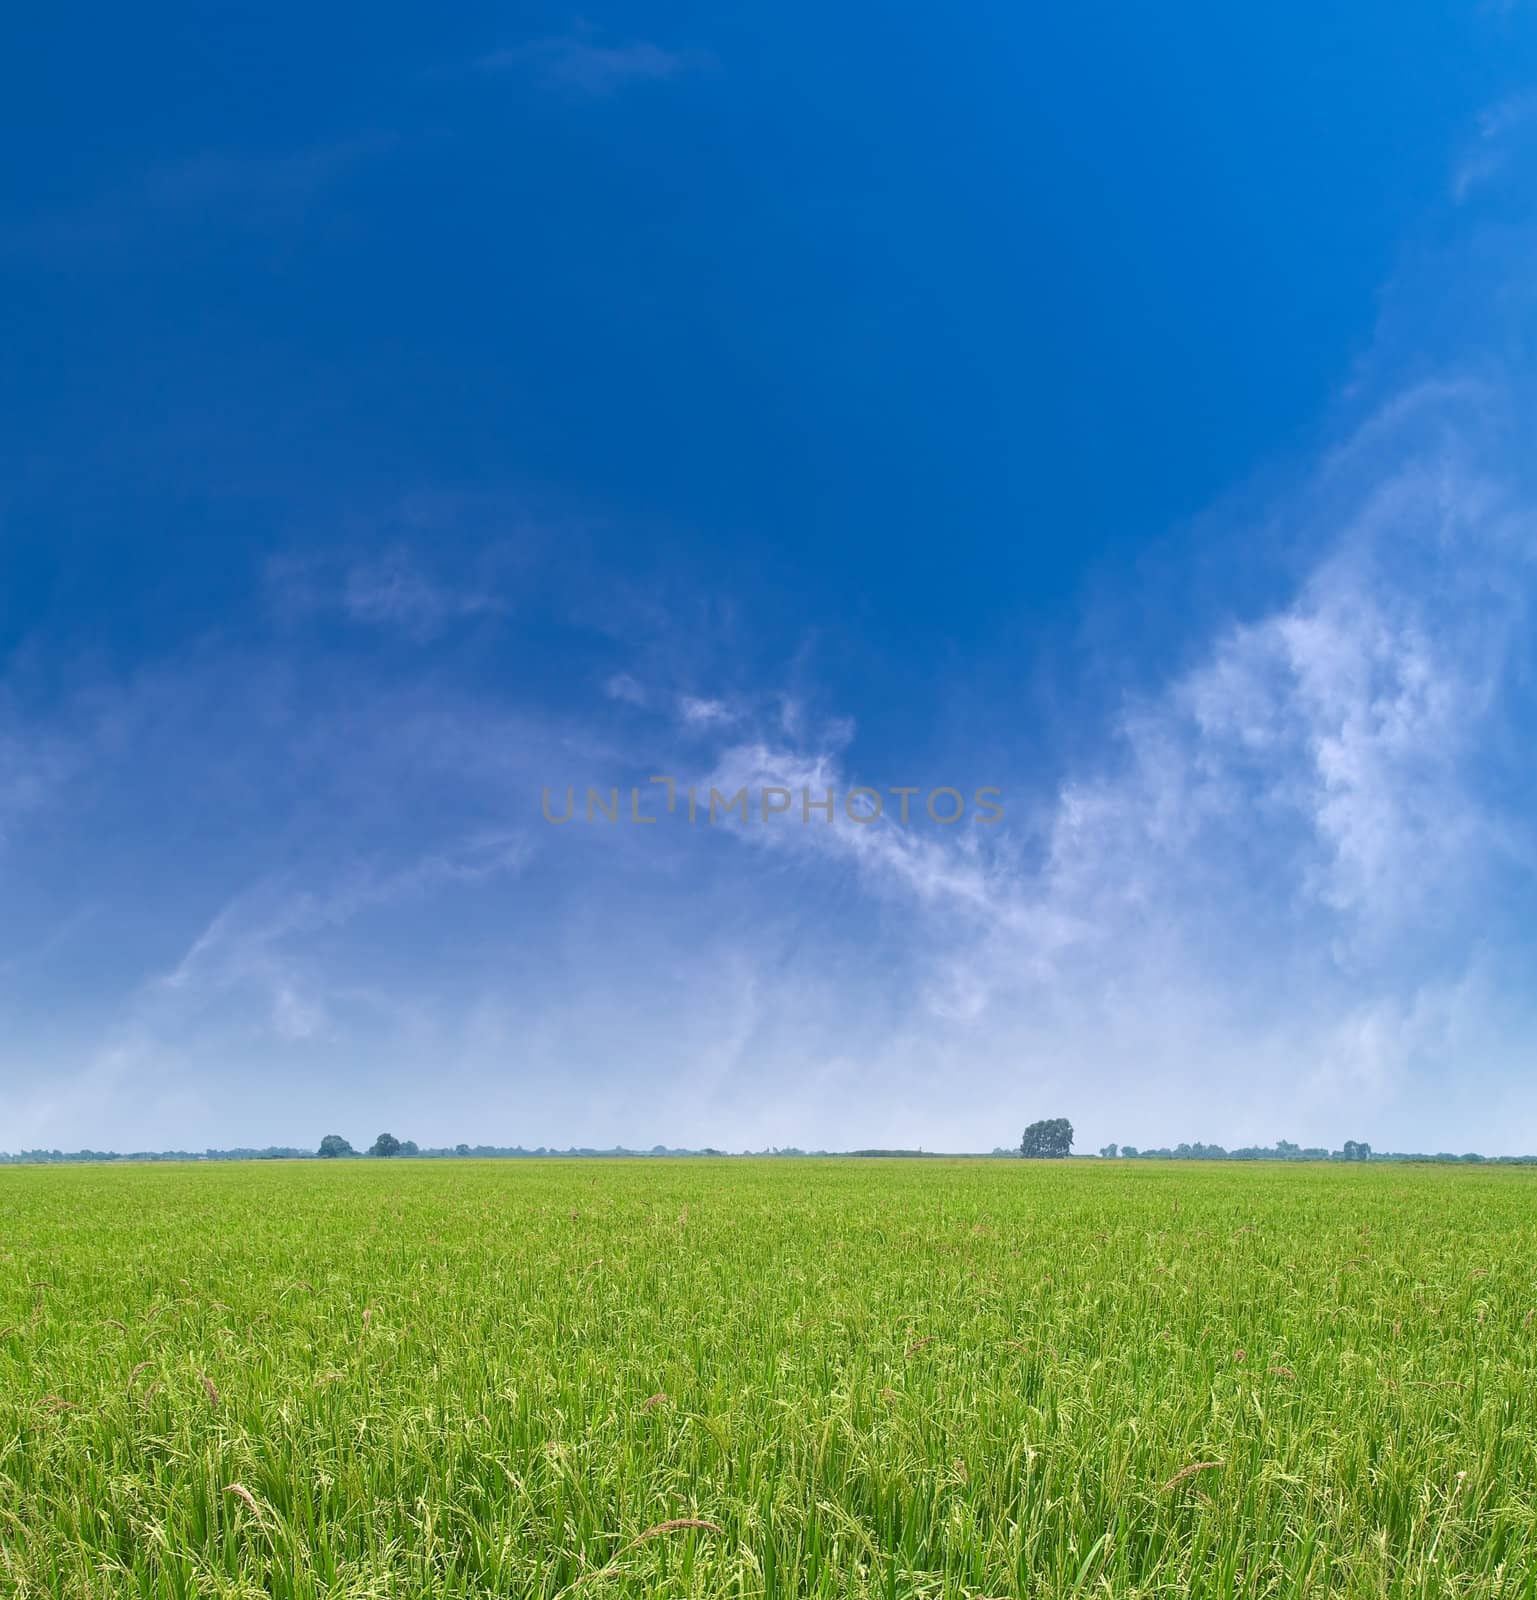 Paddy field with produce grains and beautiful sky